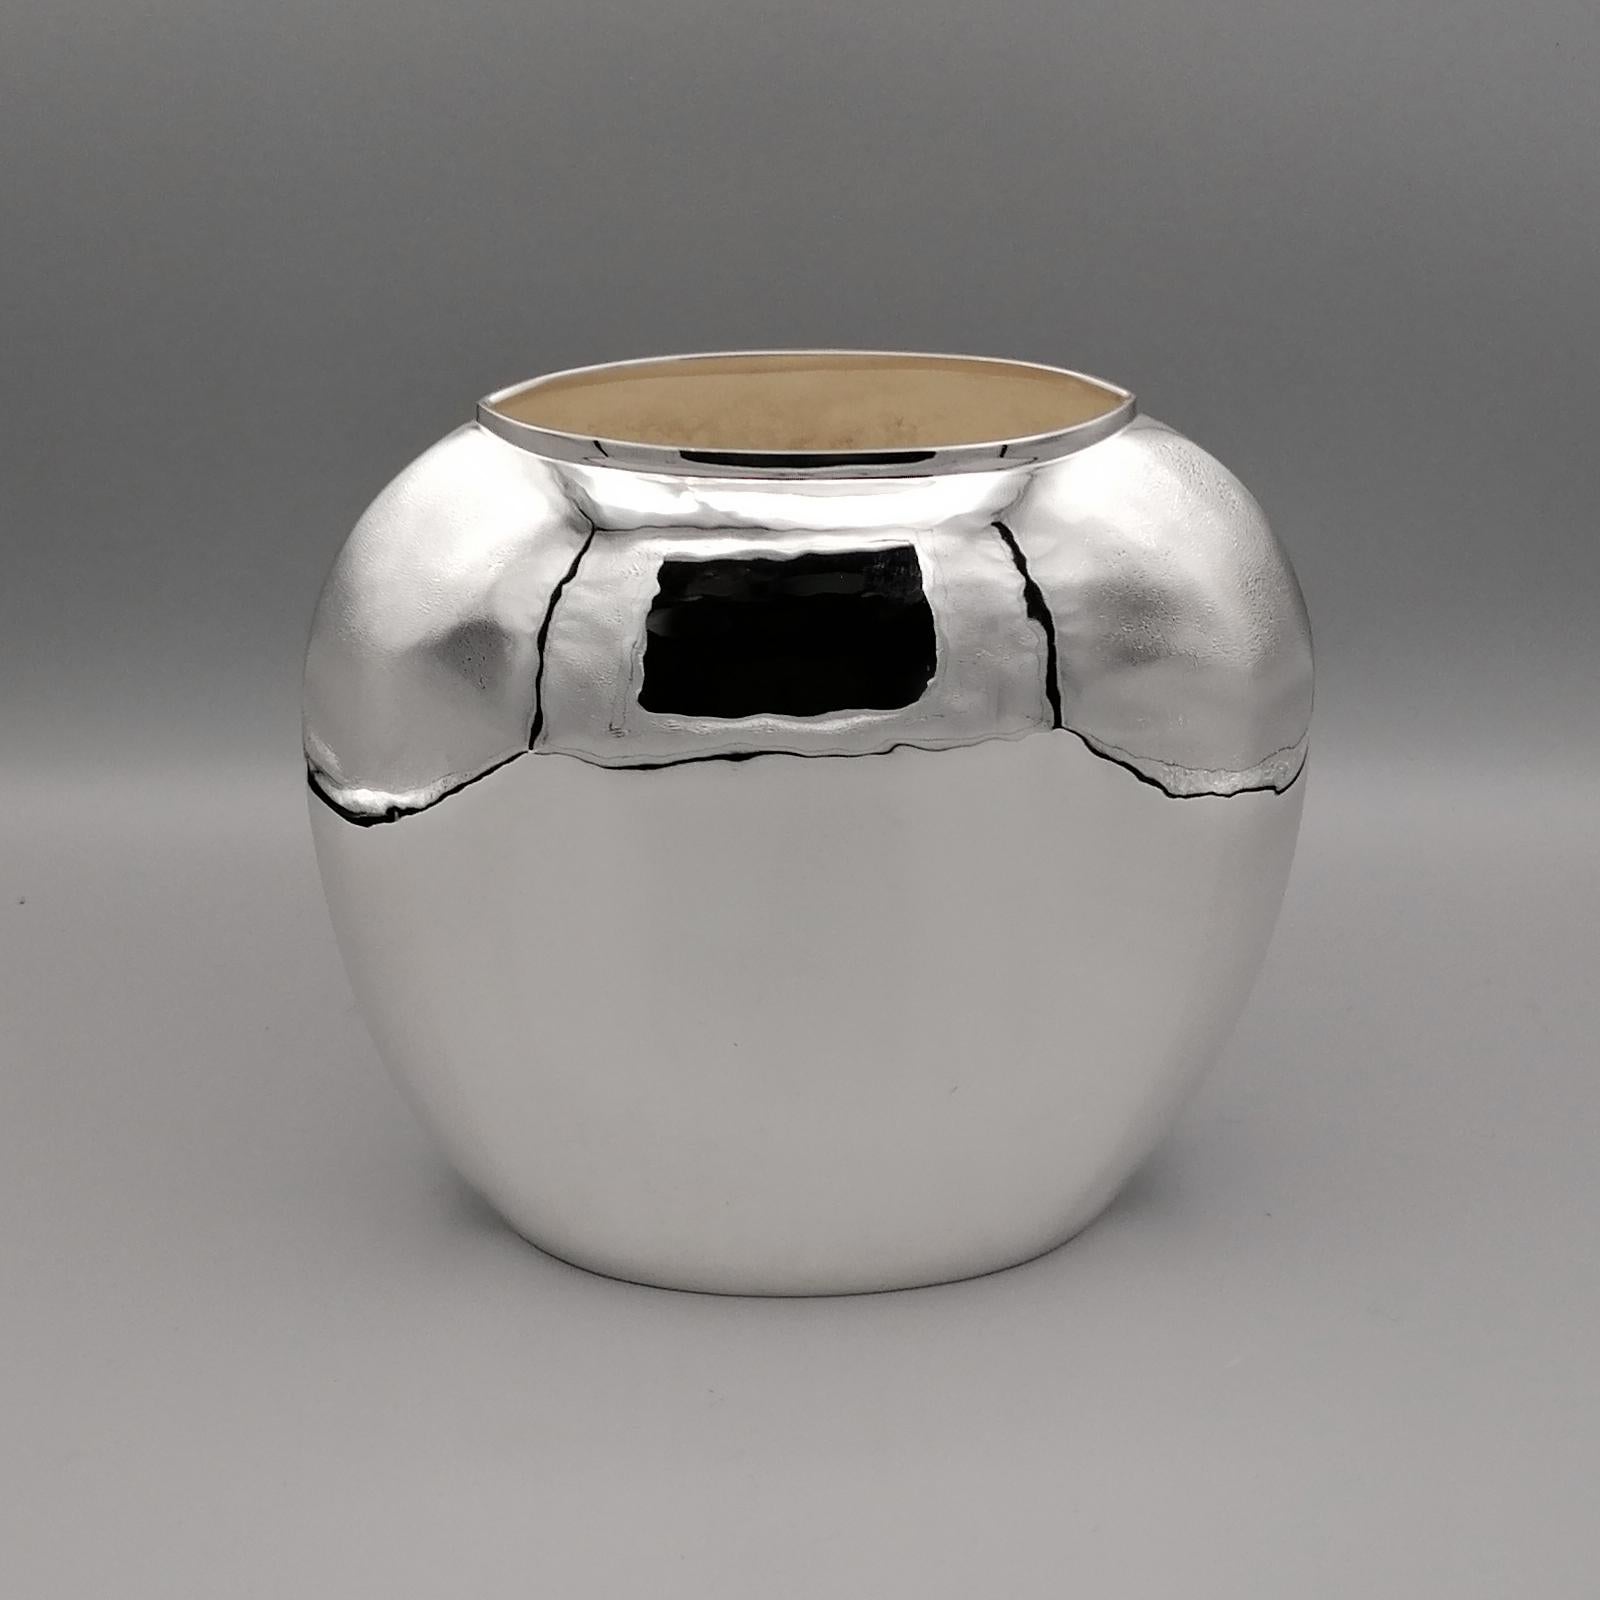 Semi-round and flattened 800 solid silver vase.
The vase was completely handmade in Milan - Italy - by the silversmith 